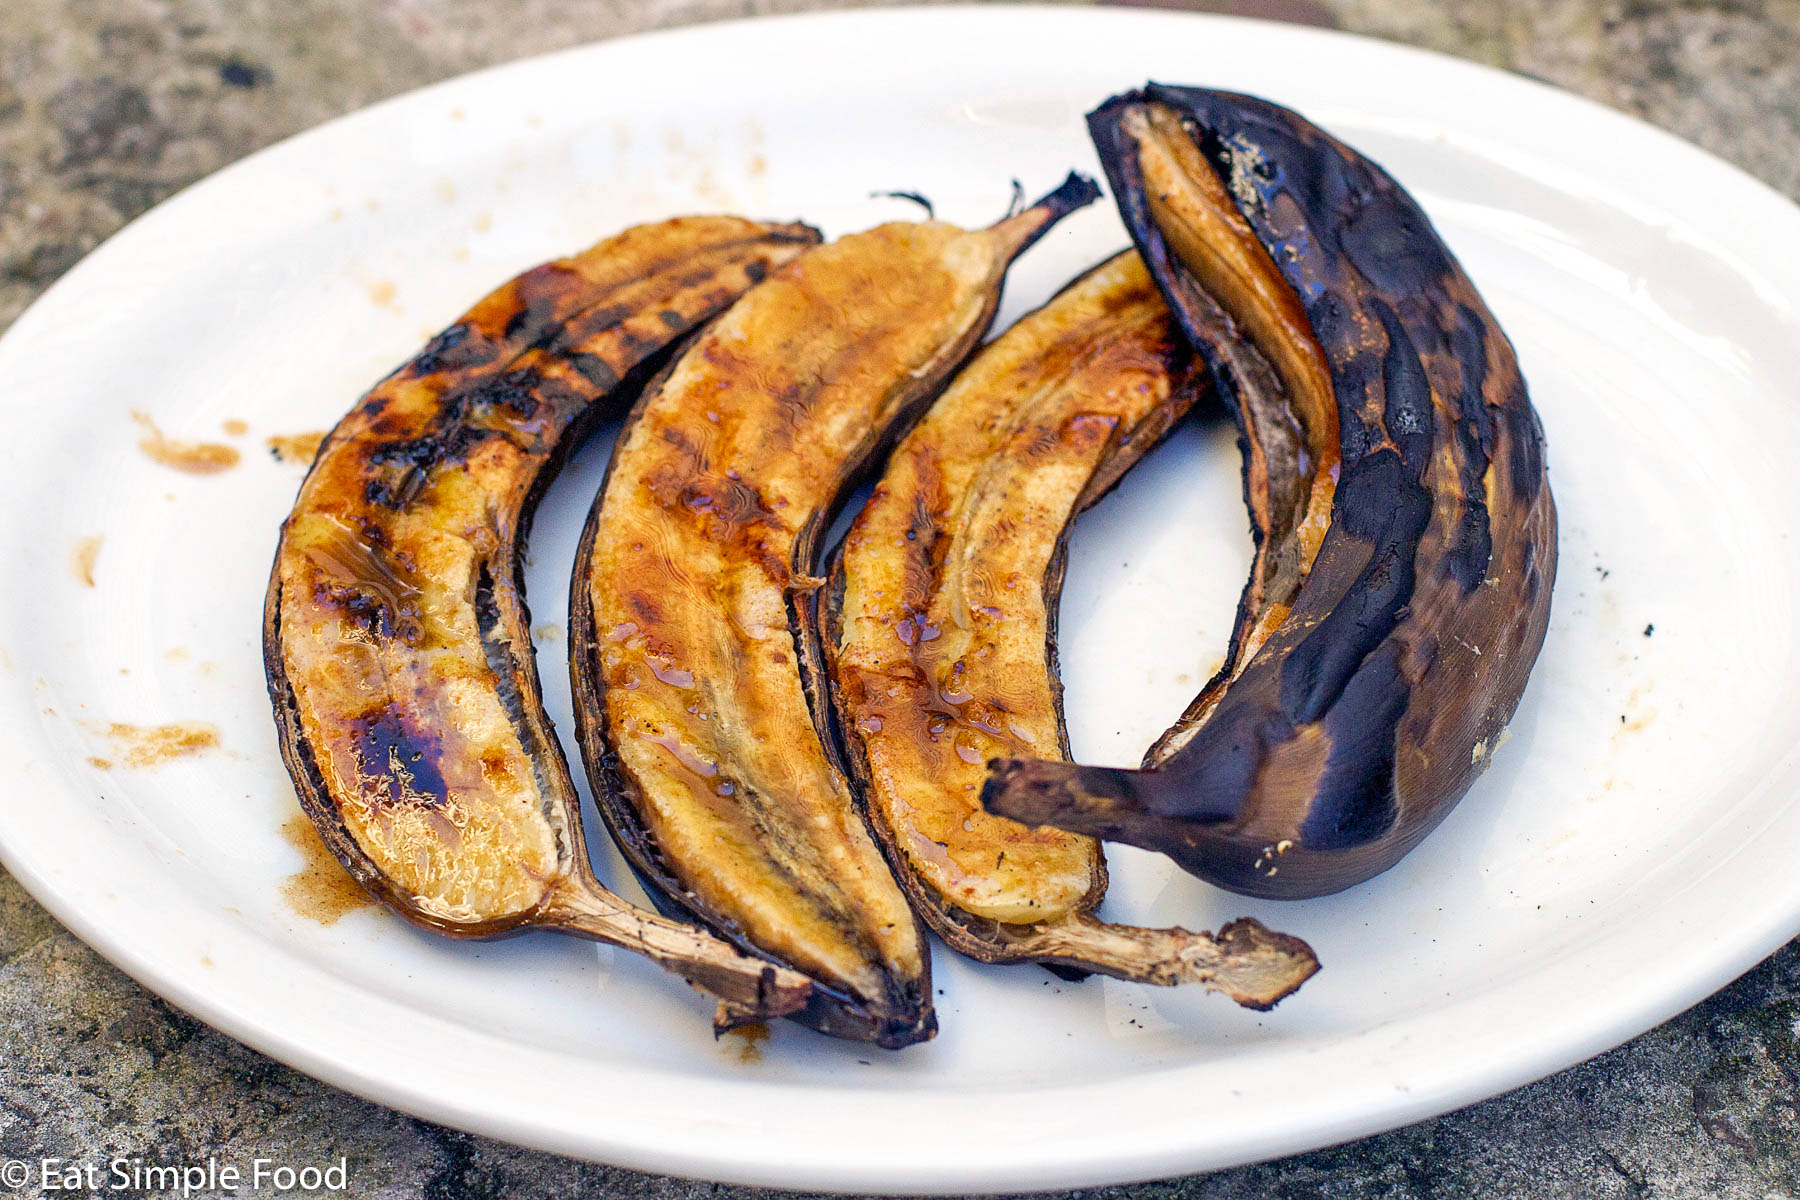 3 Grilled Banana Halves and One Whole, still in skin & grilled. Set on a white plate and has a honey butter glaze.